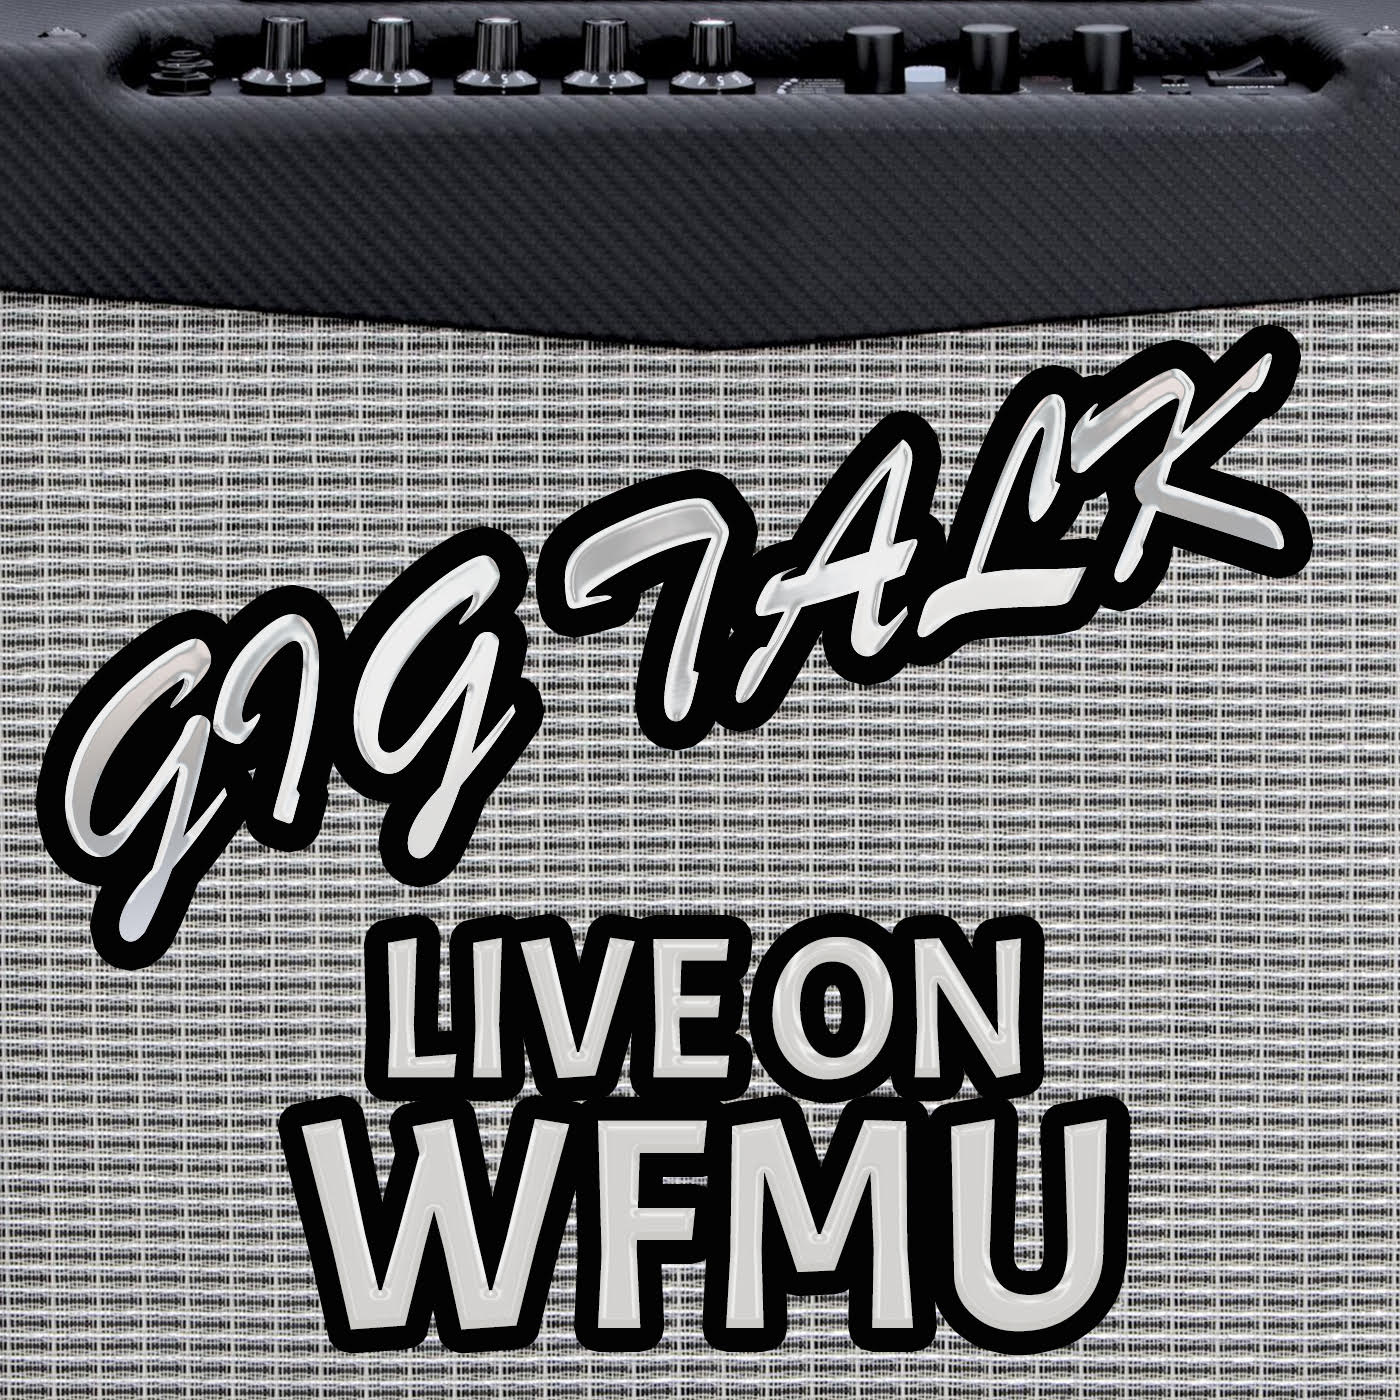 Gig Talk with Kevin S. and Matt M | WFMU